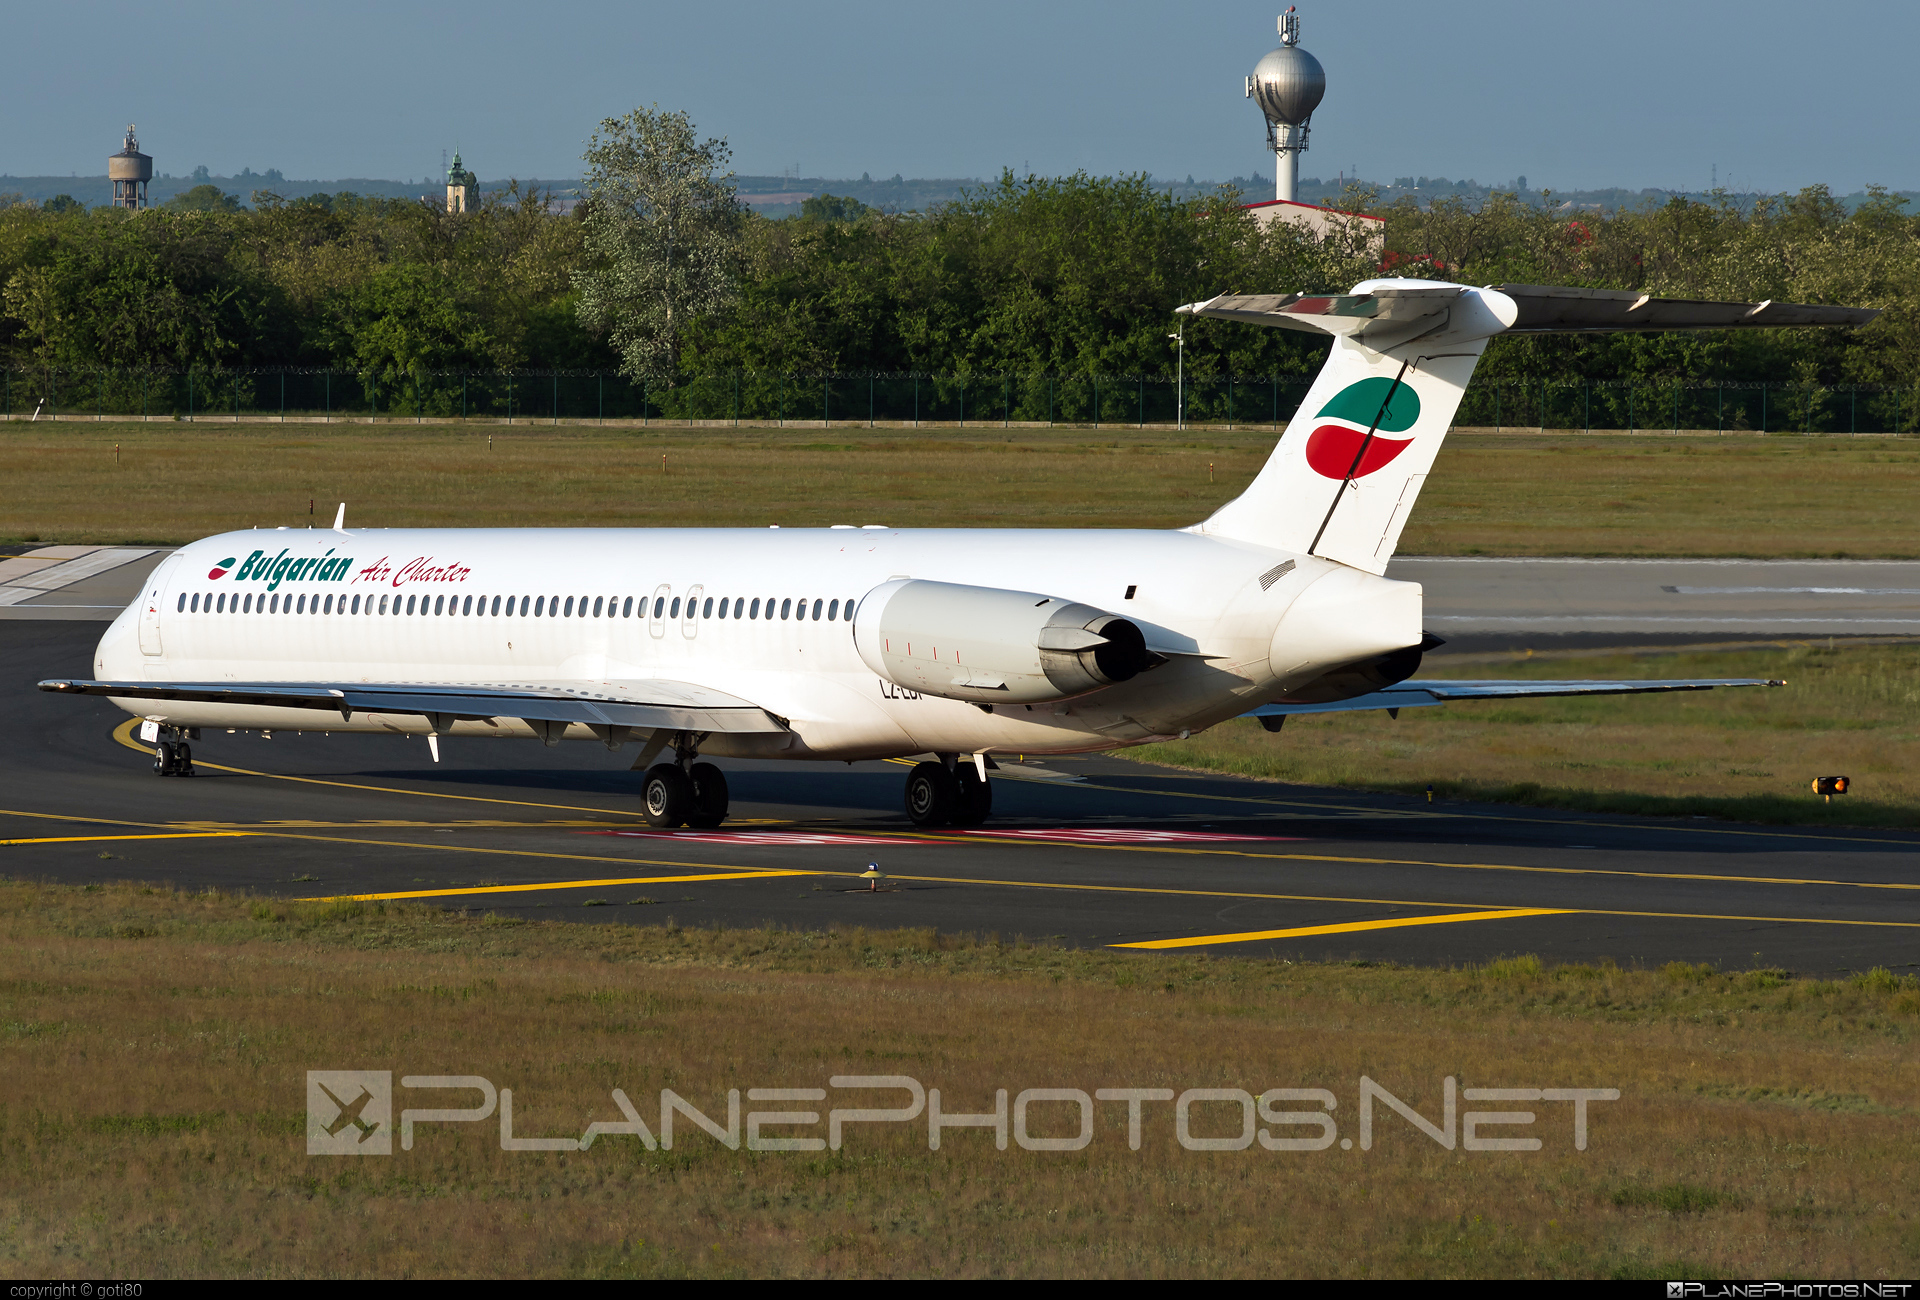 McDonnell Douglas MD-82 - LZ-LDP operated by Bulgarian Air Charter #bulgarianaircharter #mcDonnellDouglas #mcdonnelldouglas80 #mcdonnelldouglas82 #mcdonnelldouglasmd80 #mcdonnelldouglasmd82 #md80 #md82